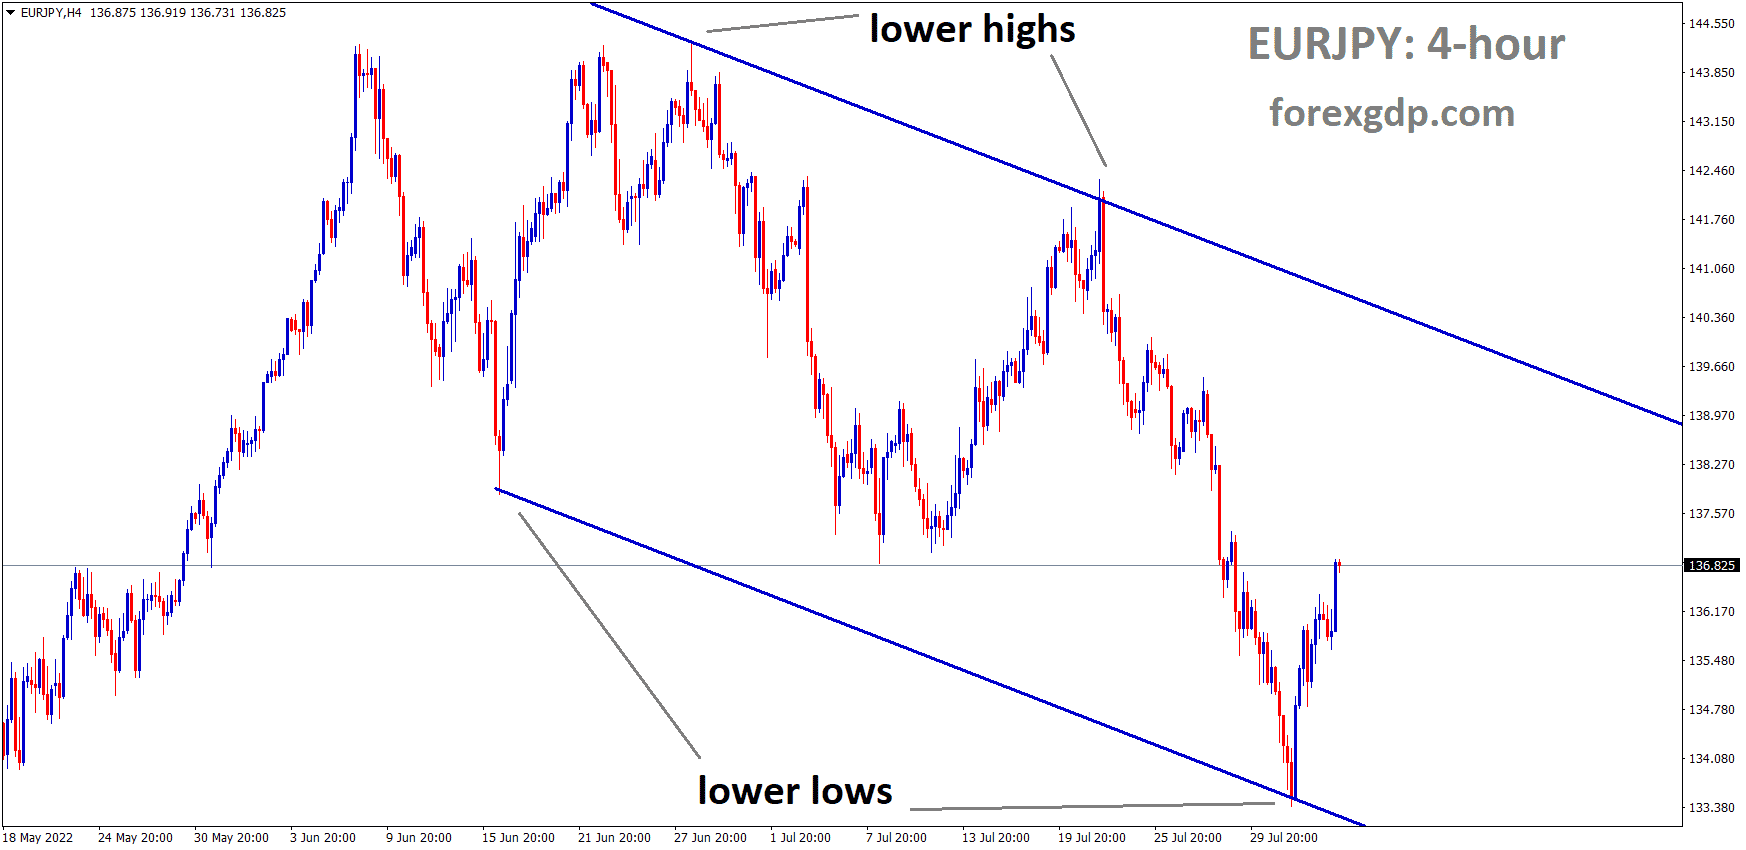 EURJPY is moving in the Descending channel and the Market has rebounded from the Lower low area of the channel